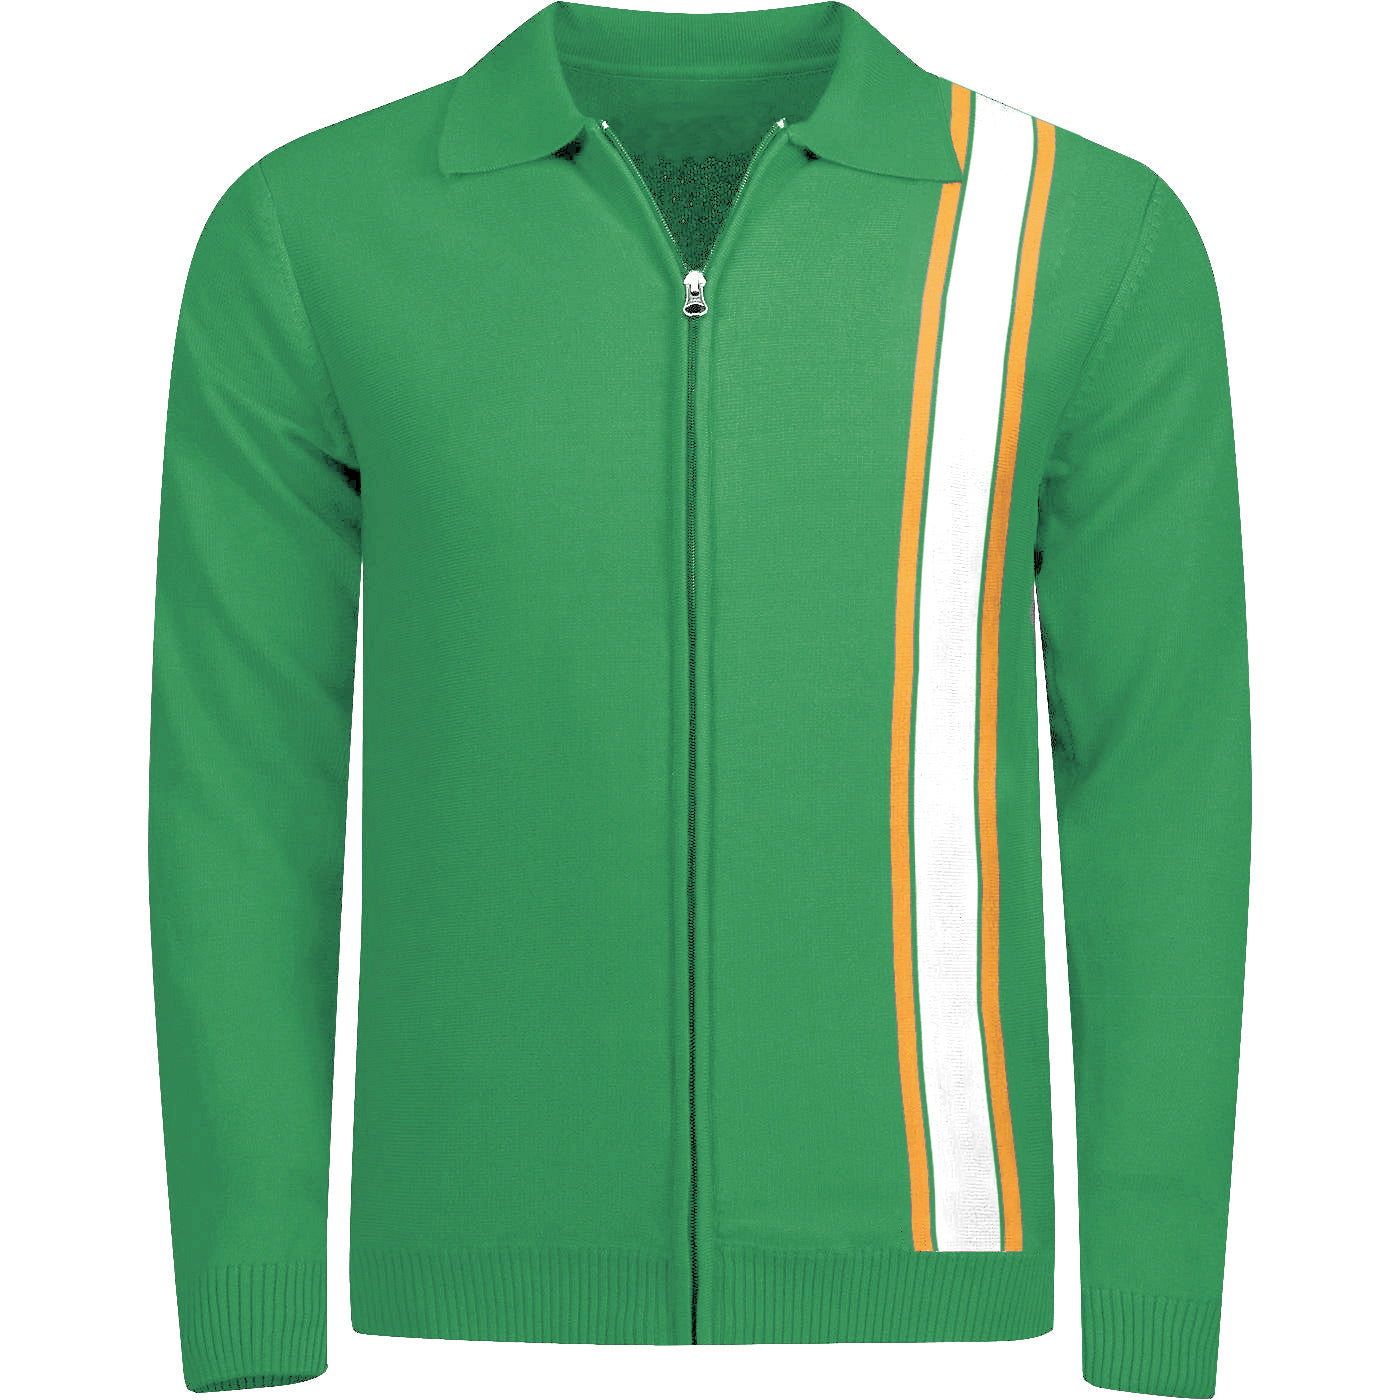 Men's Green Zip Knitted Cardigan With White & Yellow Racing Stripes